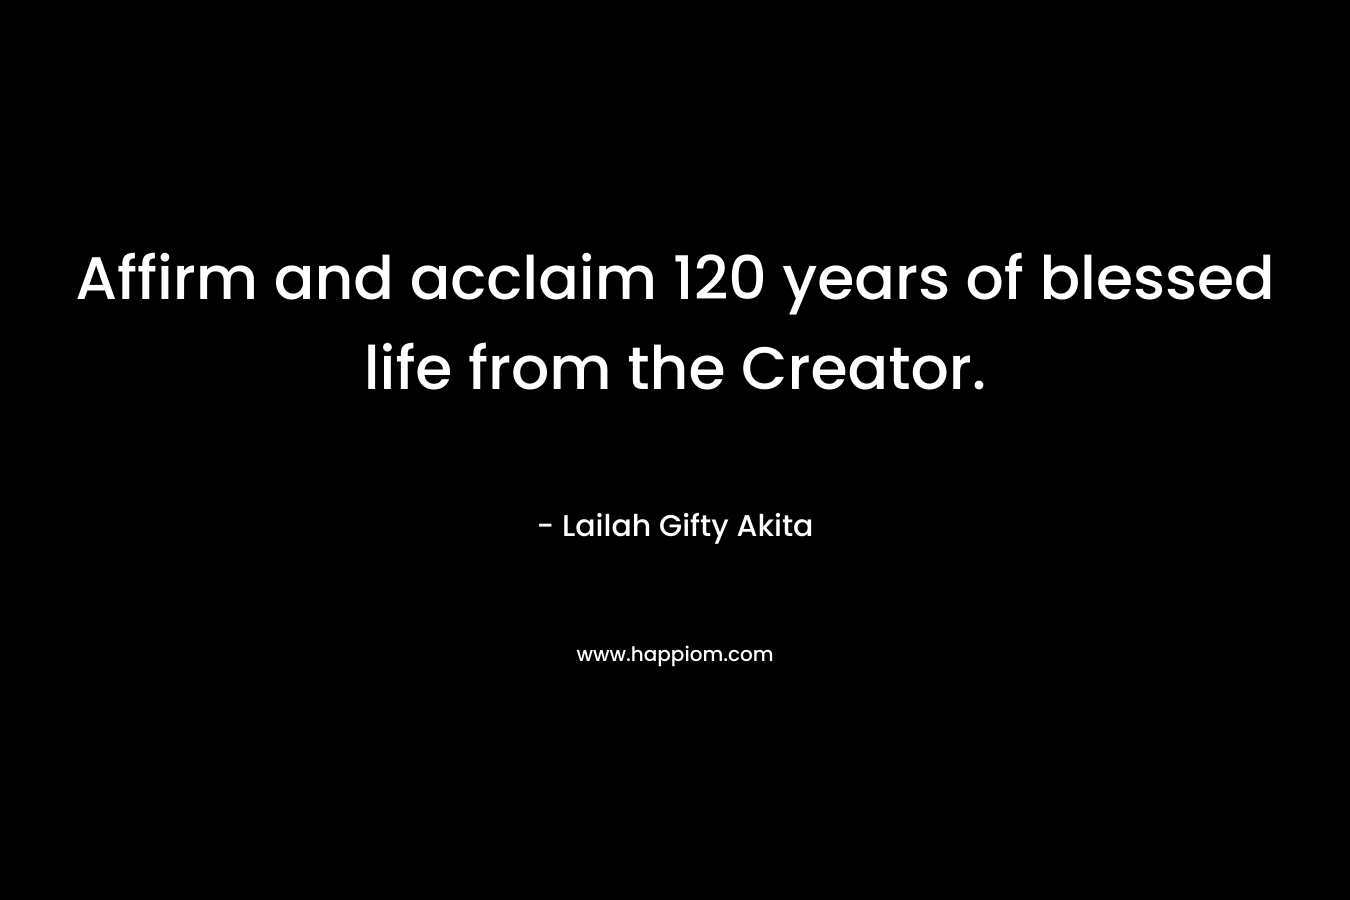 Affirm and acclaim 120 years of blessed life from the Creator.